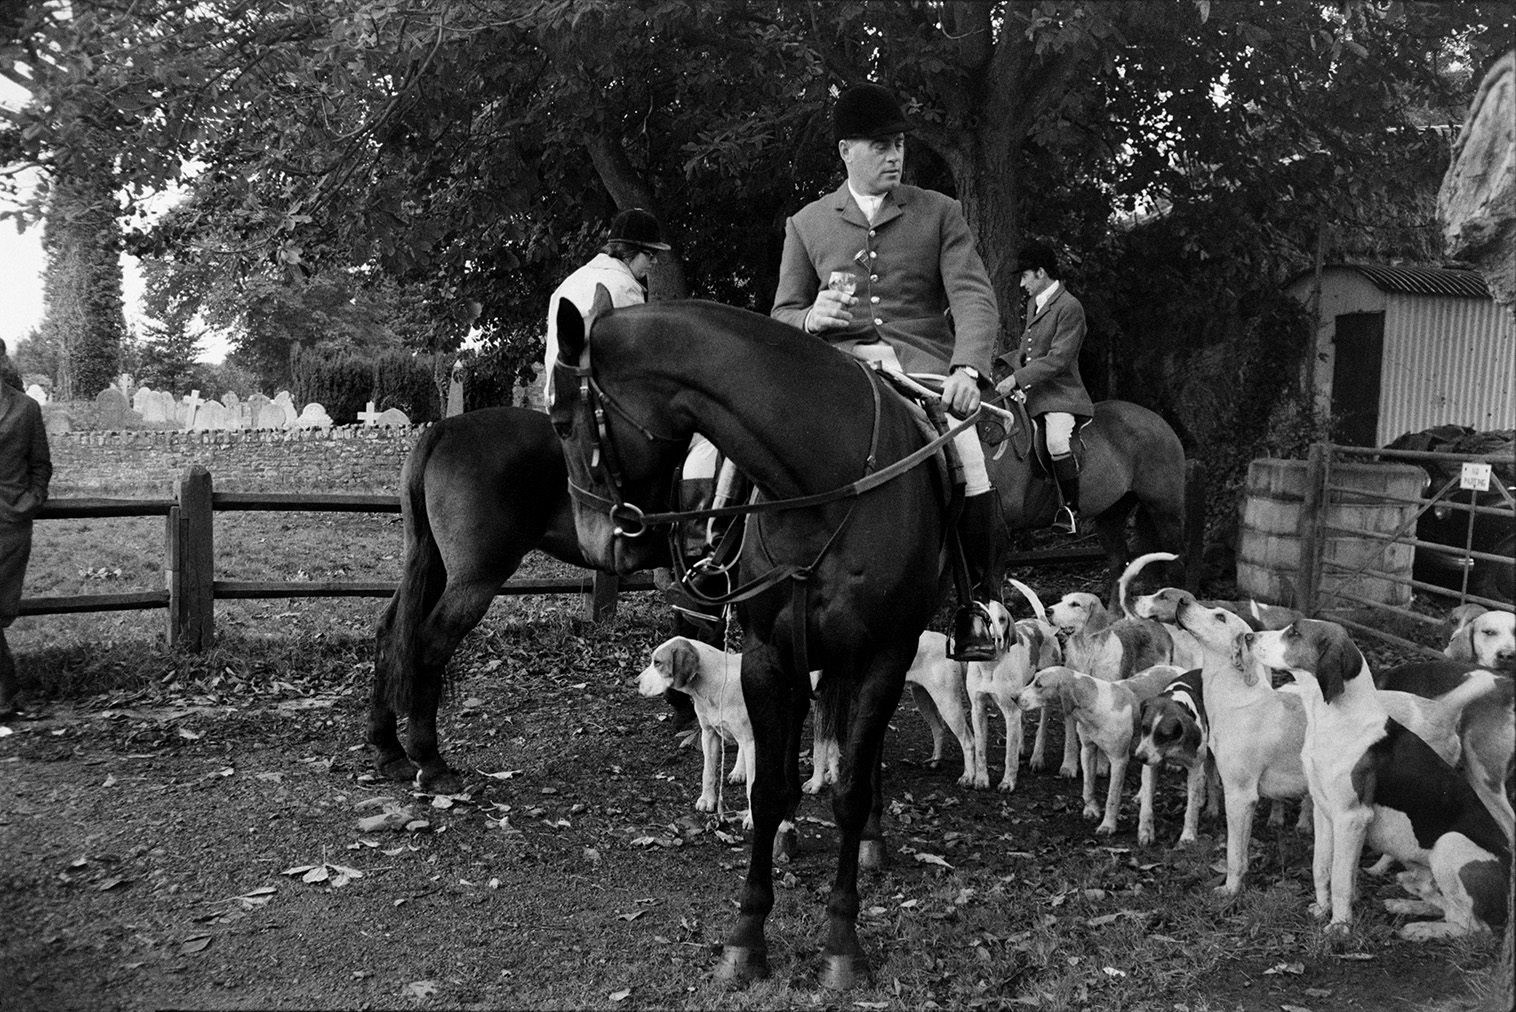 Tavistock Staghound hunt meet at a farm in Lapford before setting off on a hunt. Mounted huntsmen are drinking their stirrup cups and hounds are gathered around. Gravestones in a churchyard are visible in the background.